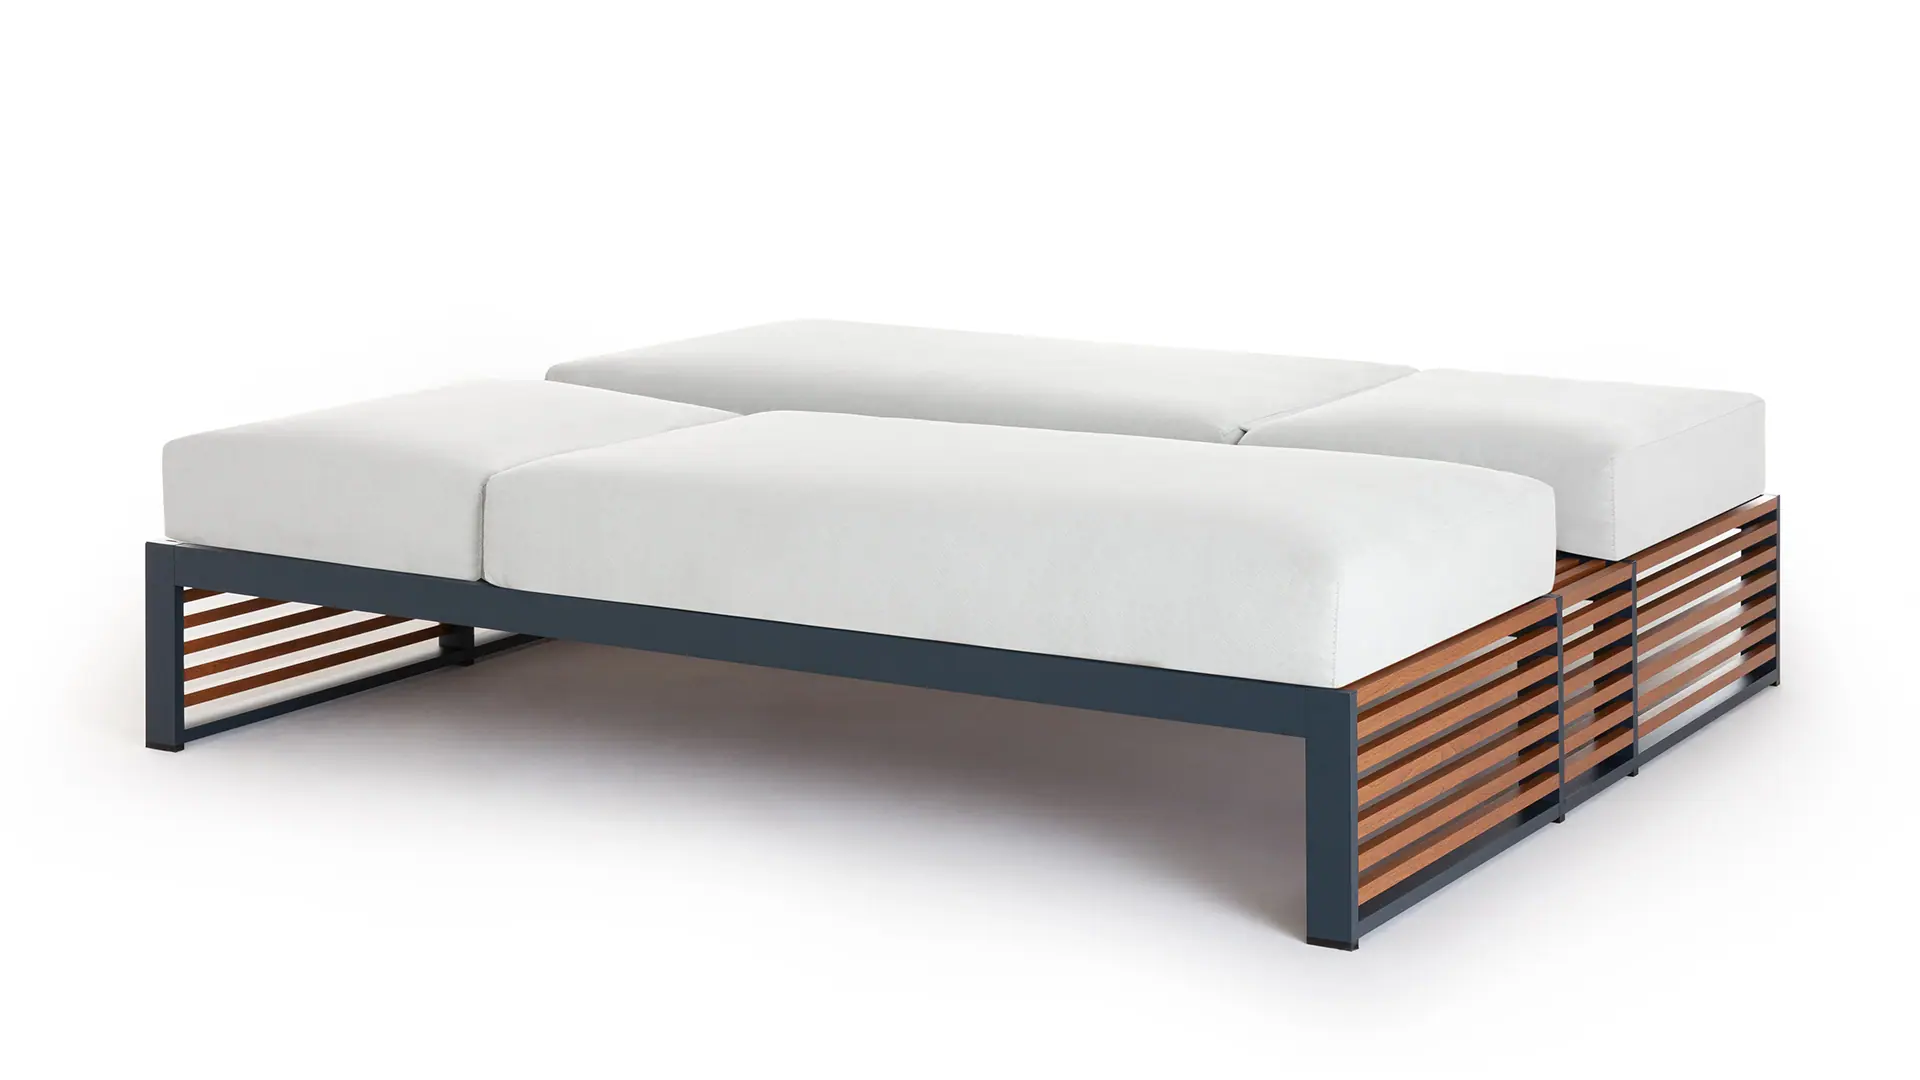 80582-80558-sun-loungers-daybeds